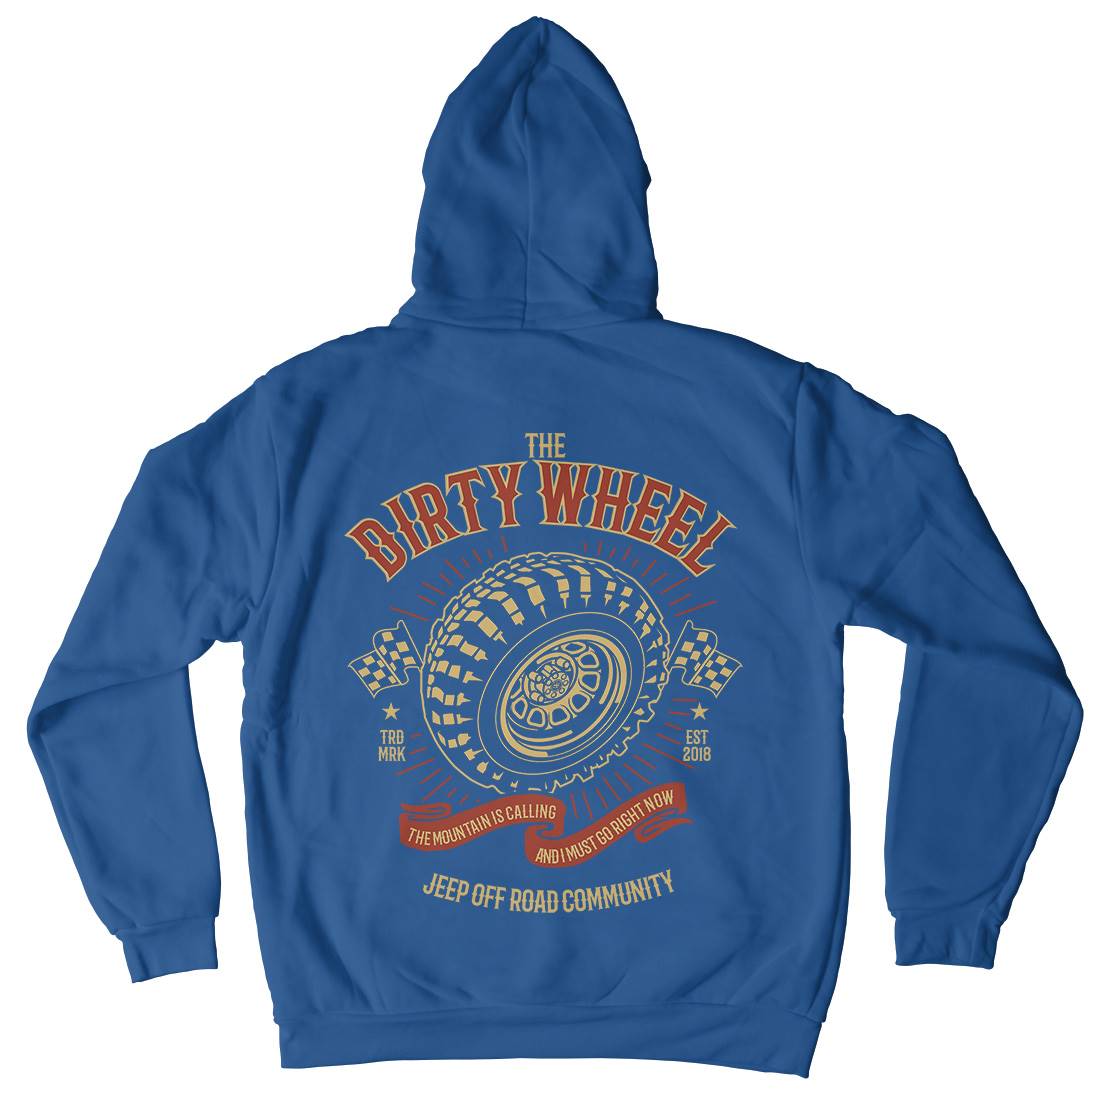 The Dirty Wheel Mens Hoodie With Pocket Cars B262